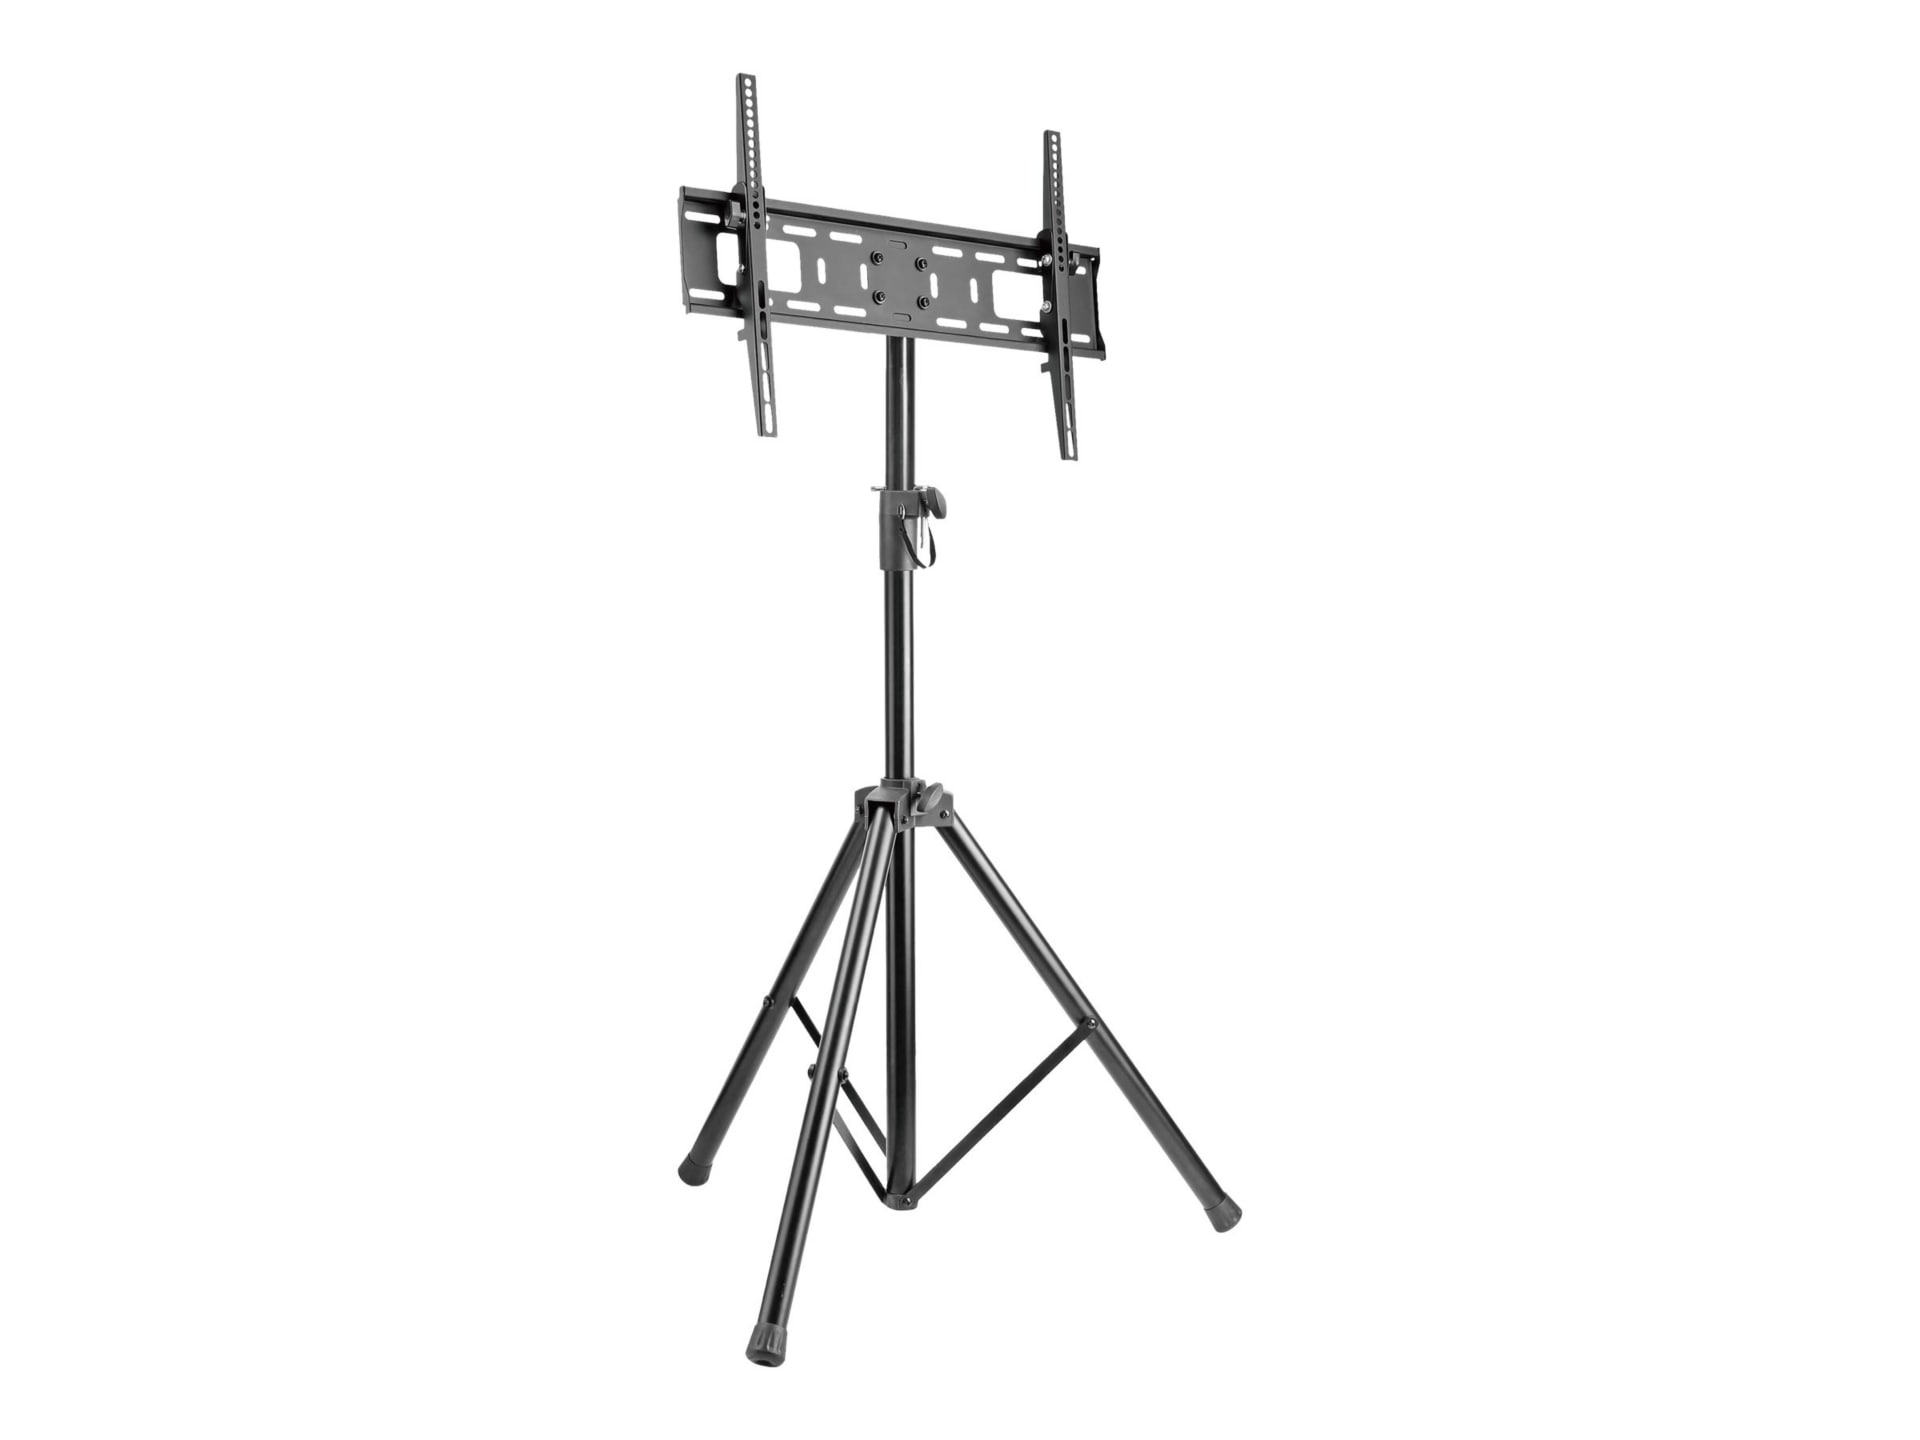 Tripp Lite Portable TV Monitor Digital Signage Stand Tripod 37-70in Display - stand - portable - for flat panel - black